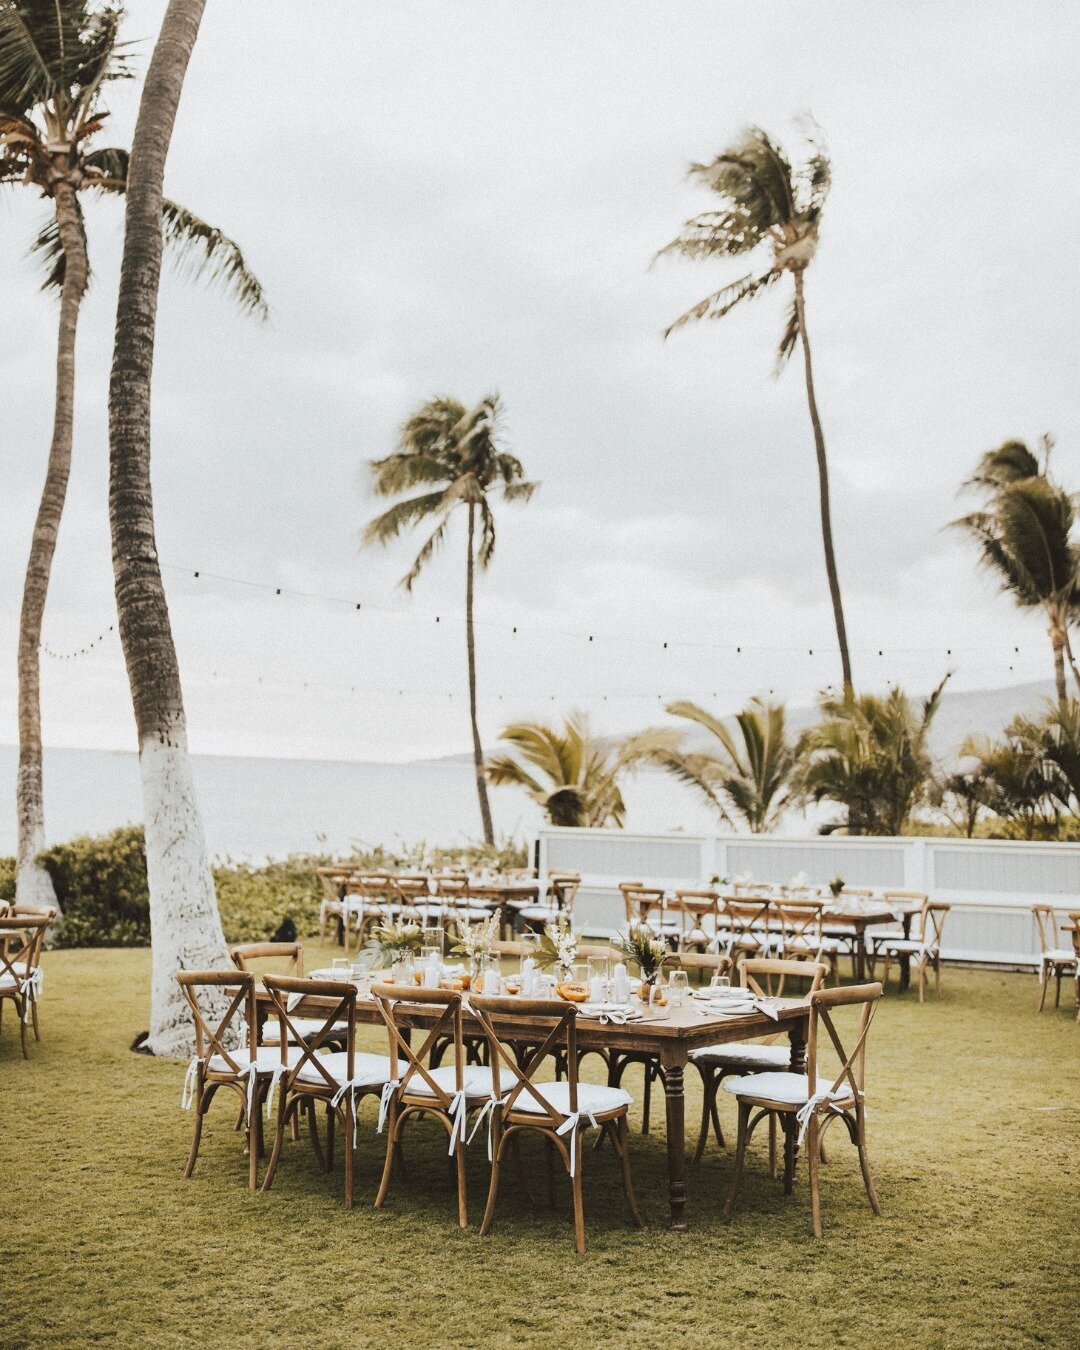 ⁠The wedding of Emily and Andrew at @sugarbeachevents ⁠with papaya accents, monochromatic details, and oceanfront views. ⁠
⁠
Planning &amp; Design @opihilove ⁠
Location @sugarbeachevents ⁠
Photography @swidrakco ⁠
MUAH @meiliautumnbeauty ⁠
Flowers @b